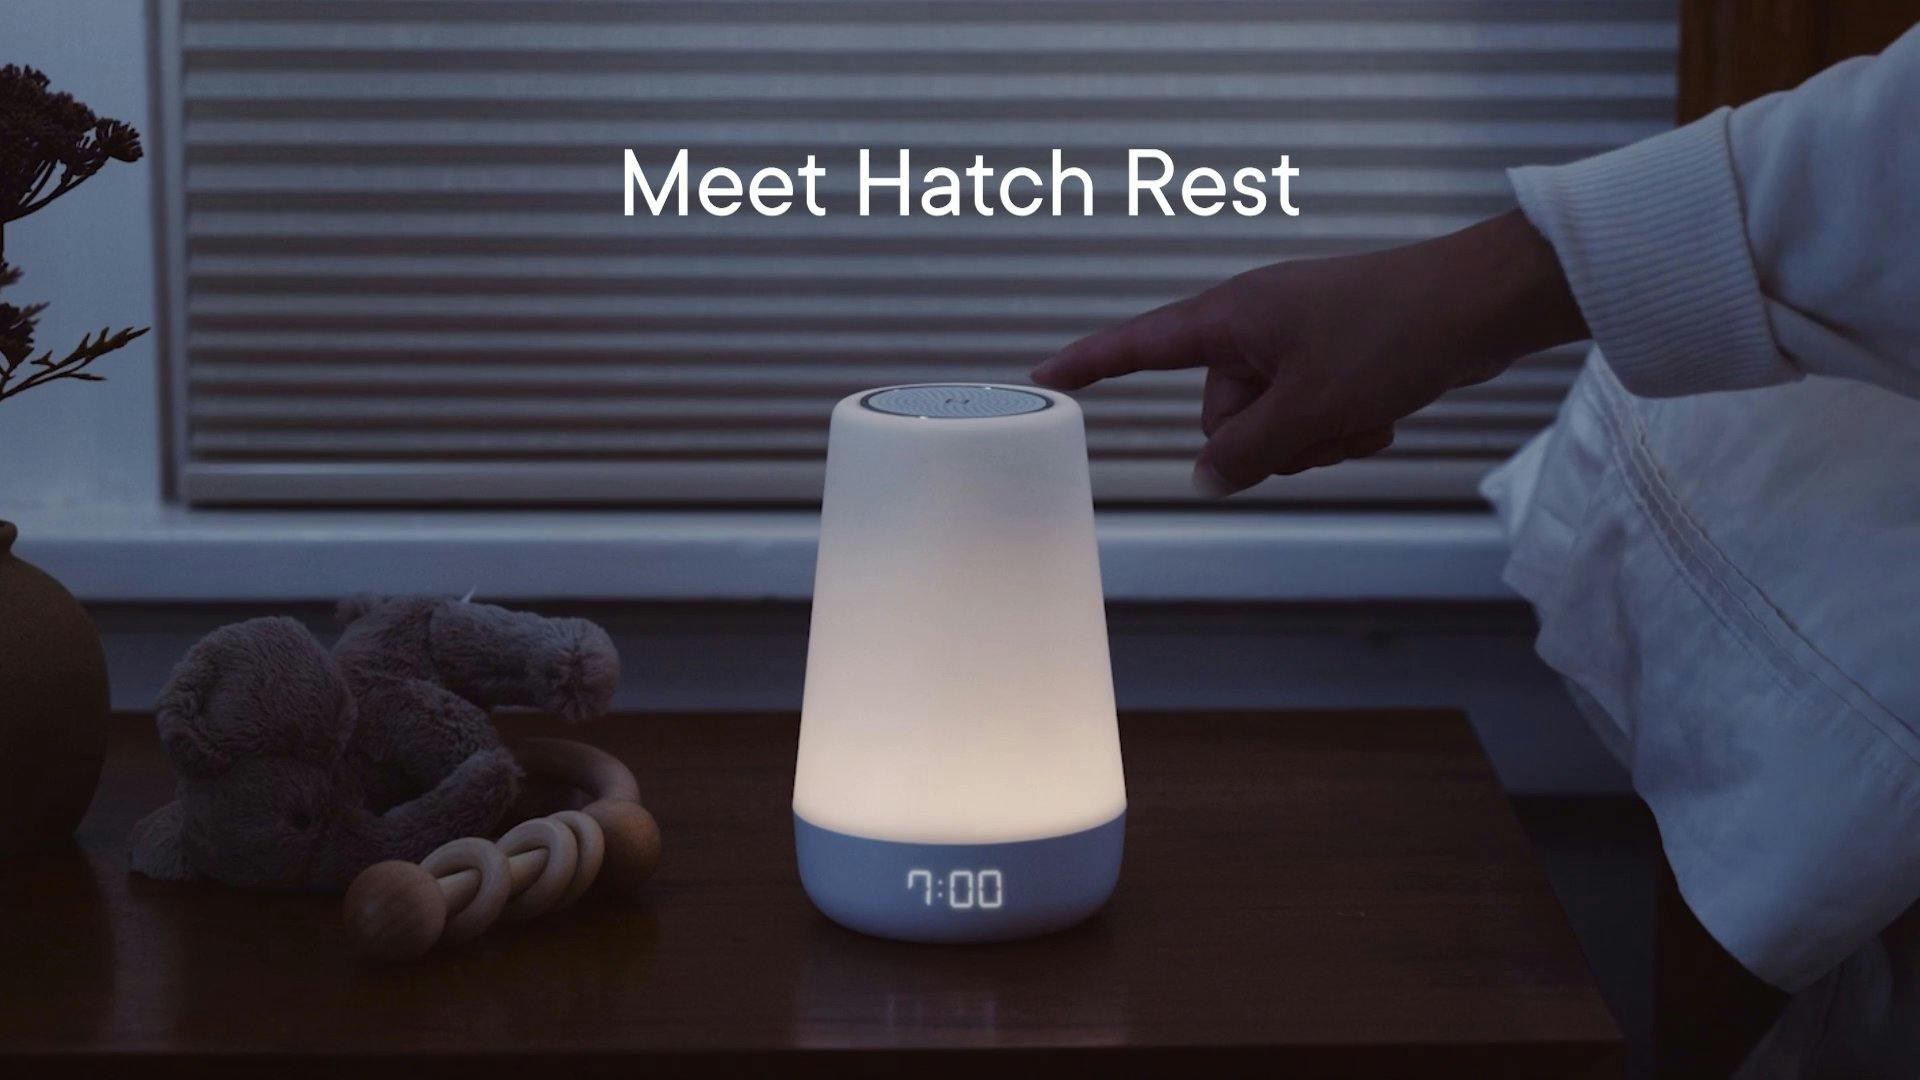 Video featuring children using Hatch Rest's wind-down routine and alarm features for a good night's rest